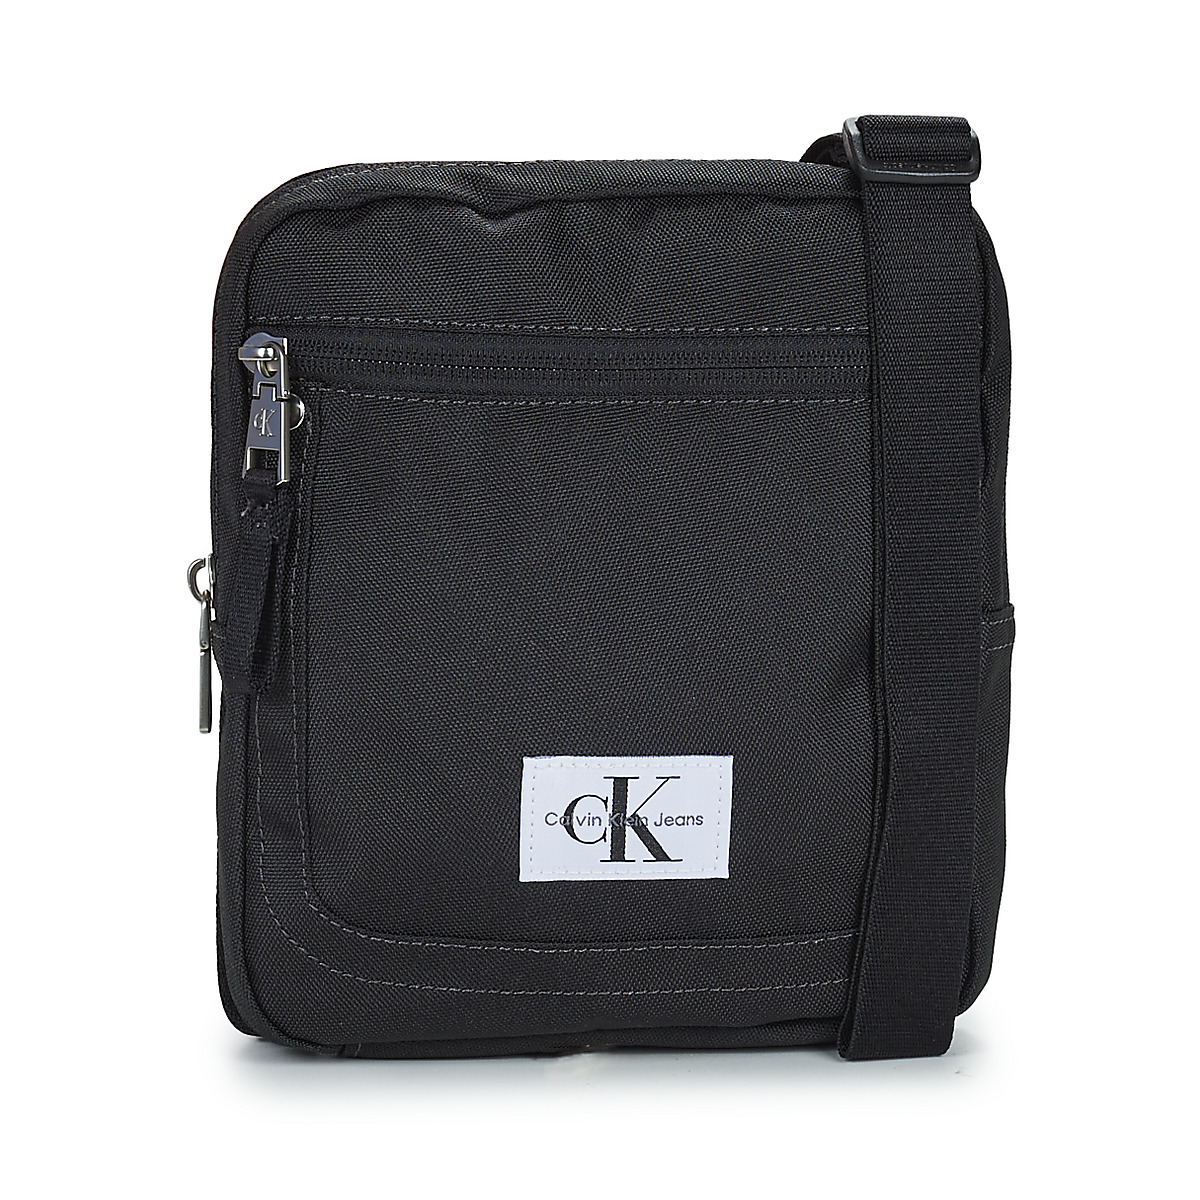 Men ESSENTIALS Spartoo Klein - - REPORTER18 W / delivery SPORT Free NET Bags Clutches | Calvin Jeans Pouches ! Black